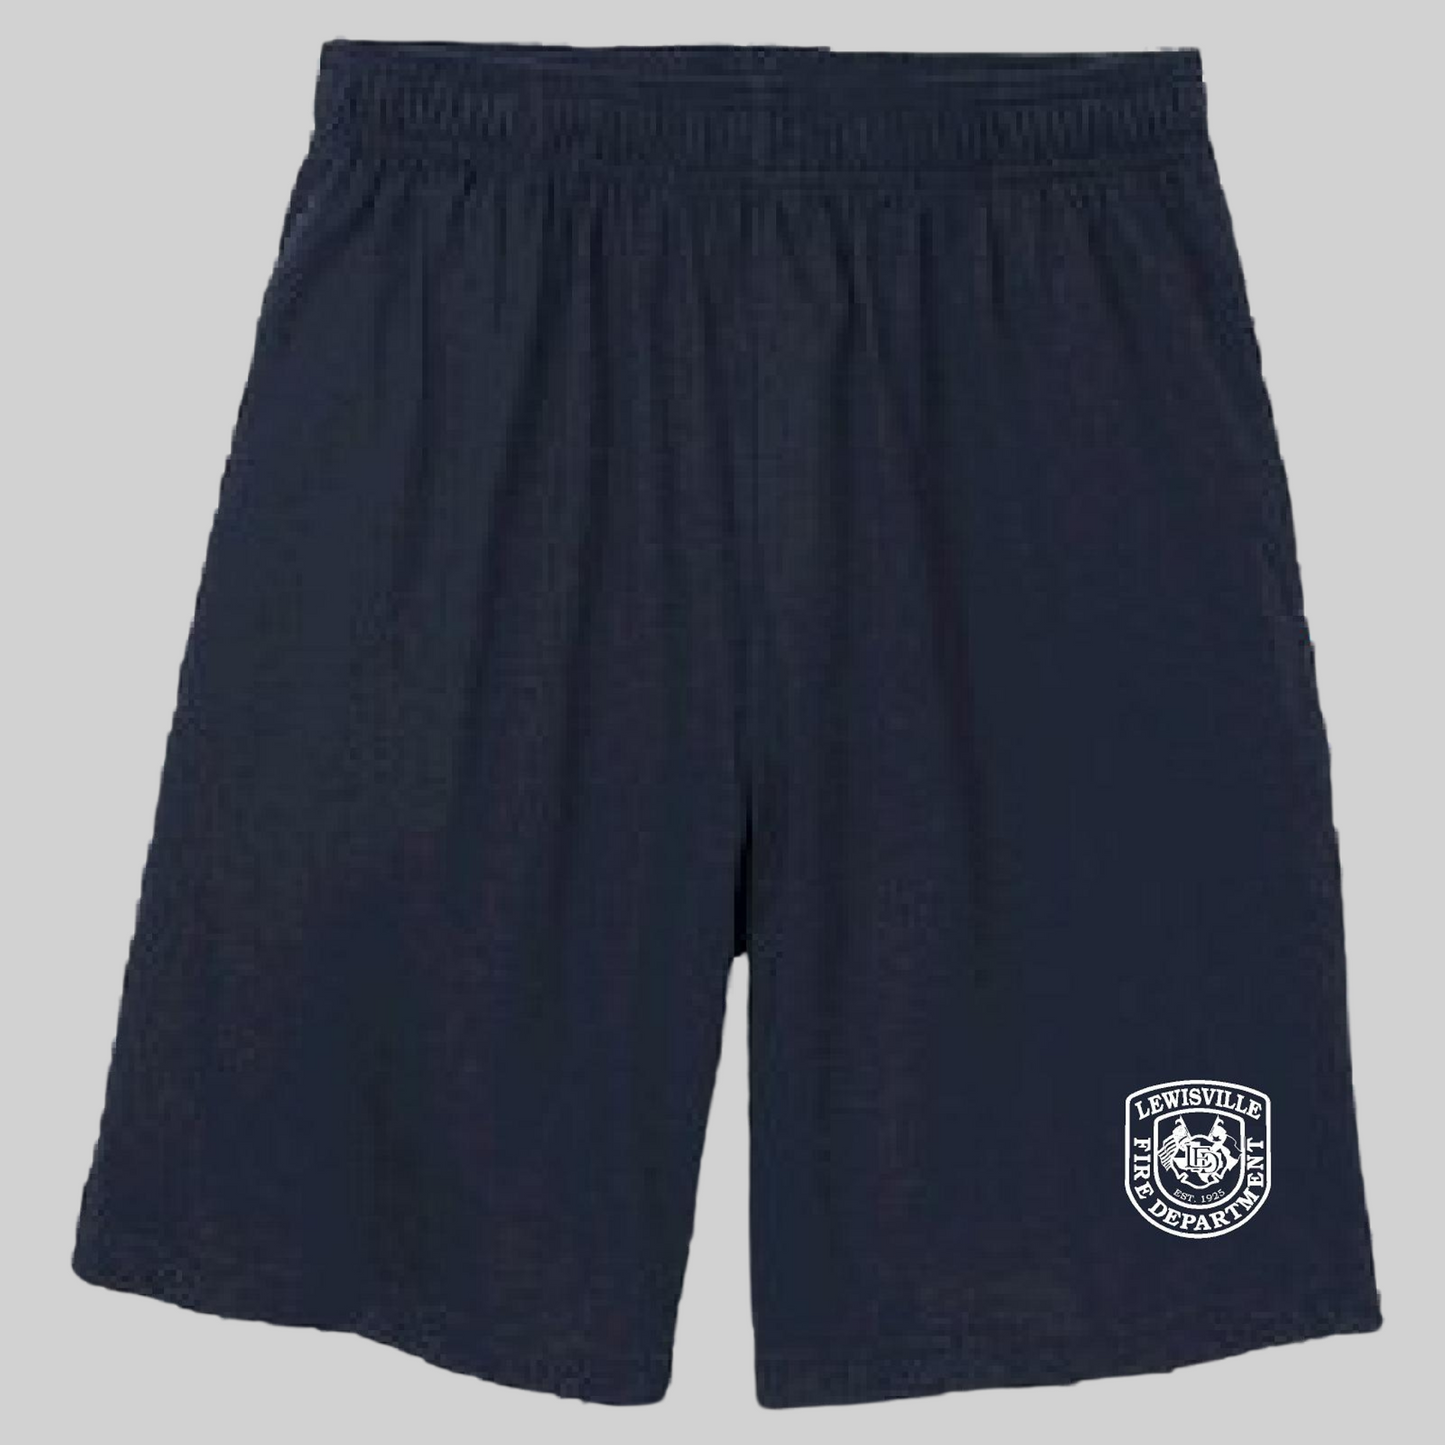 LFD Local 3606 Firefighters Non Association Members Shorts